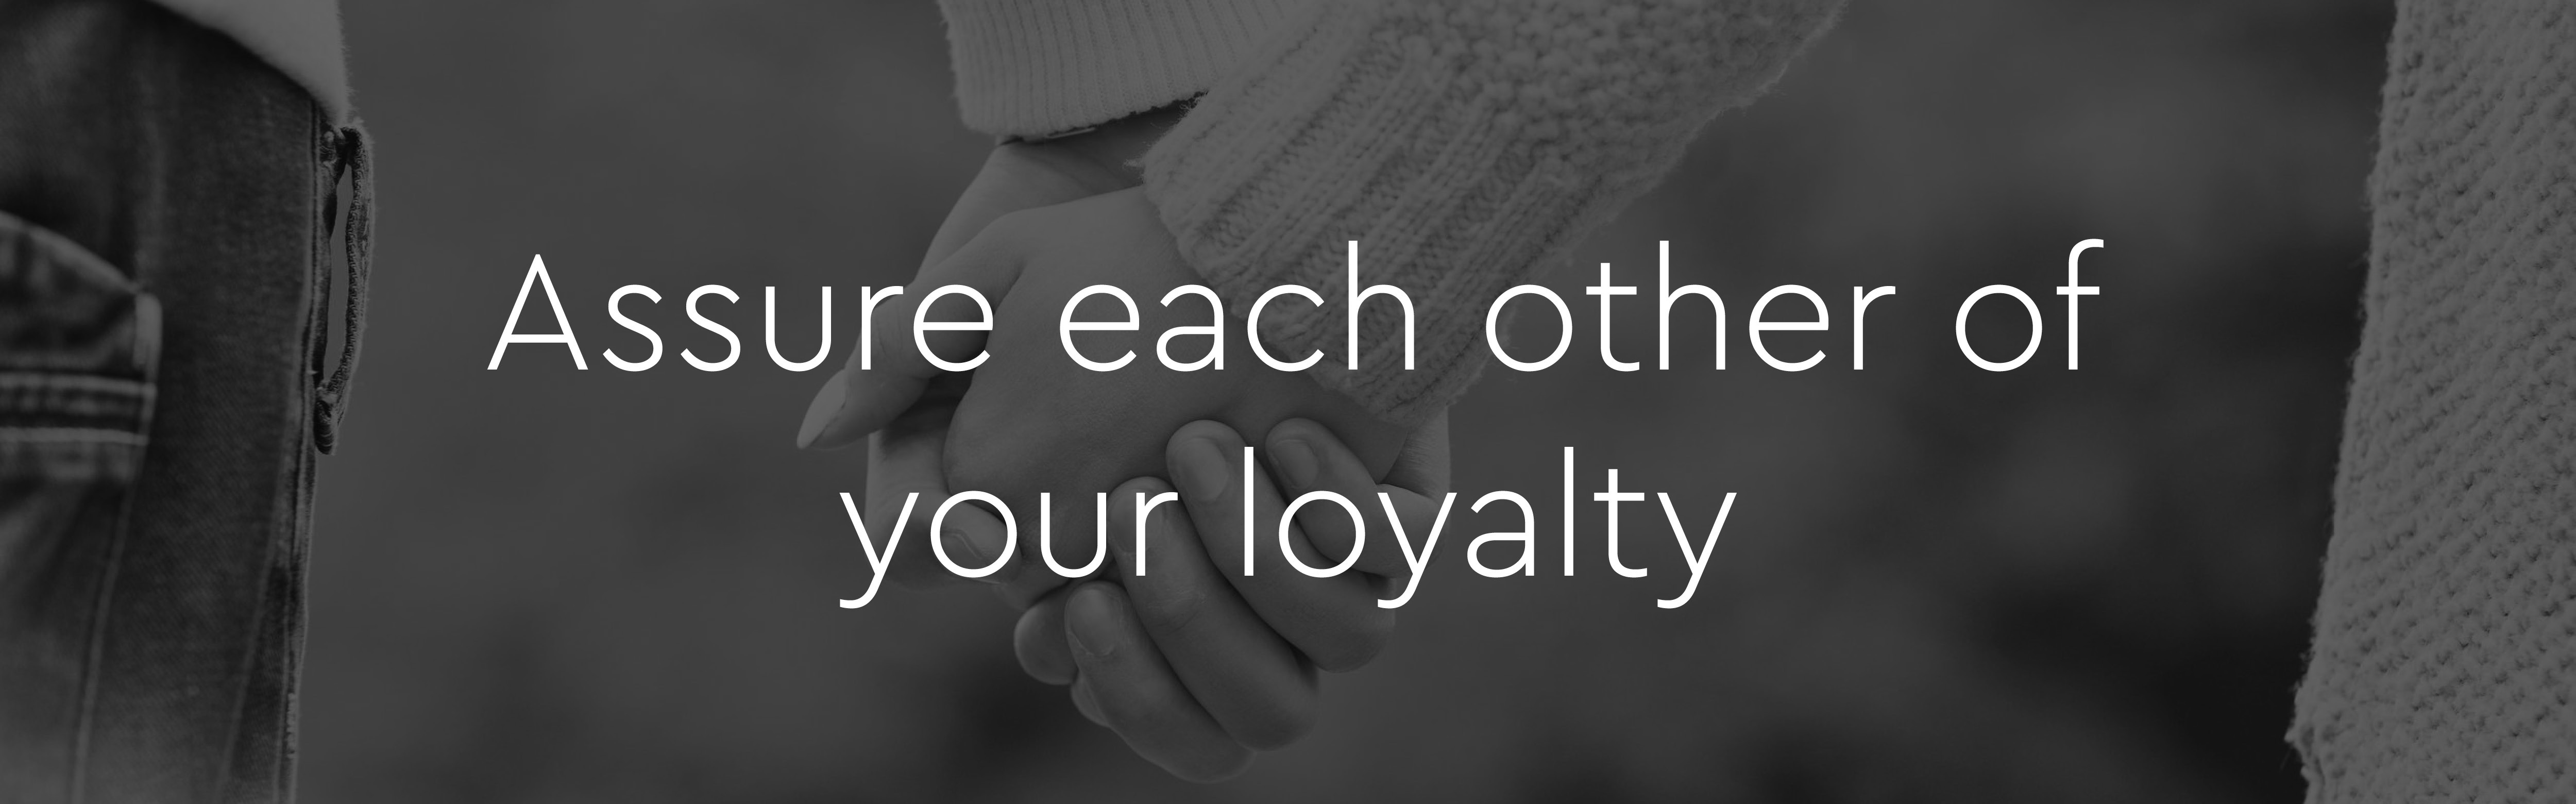 Assure each other of your loyalty